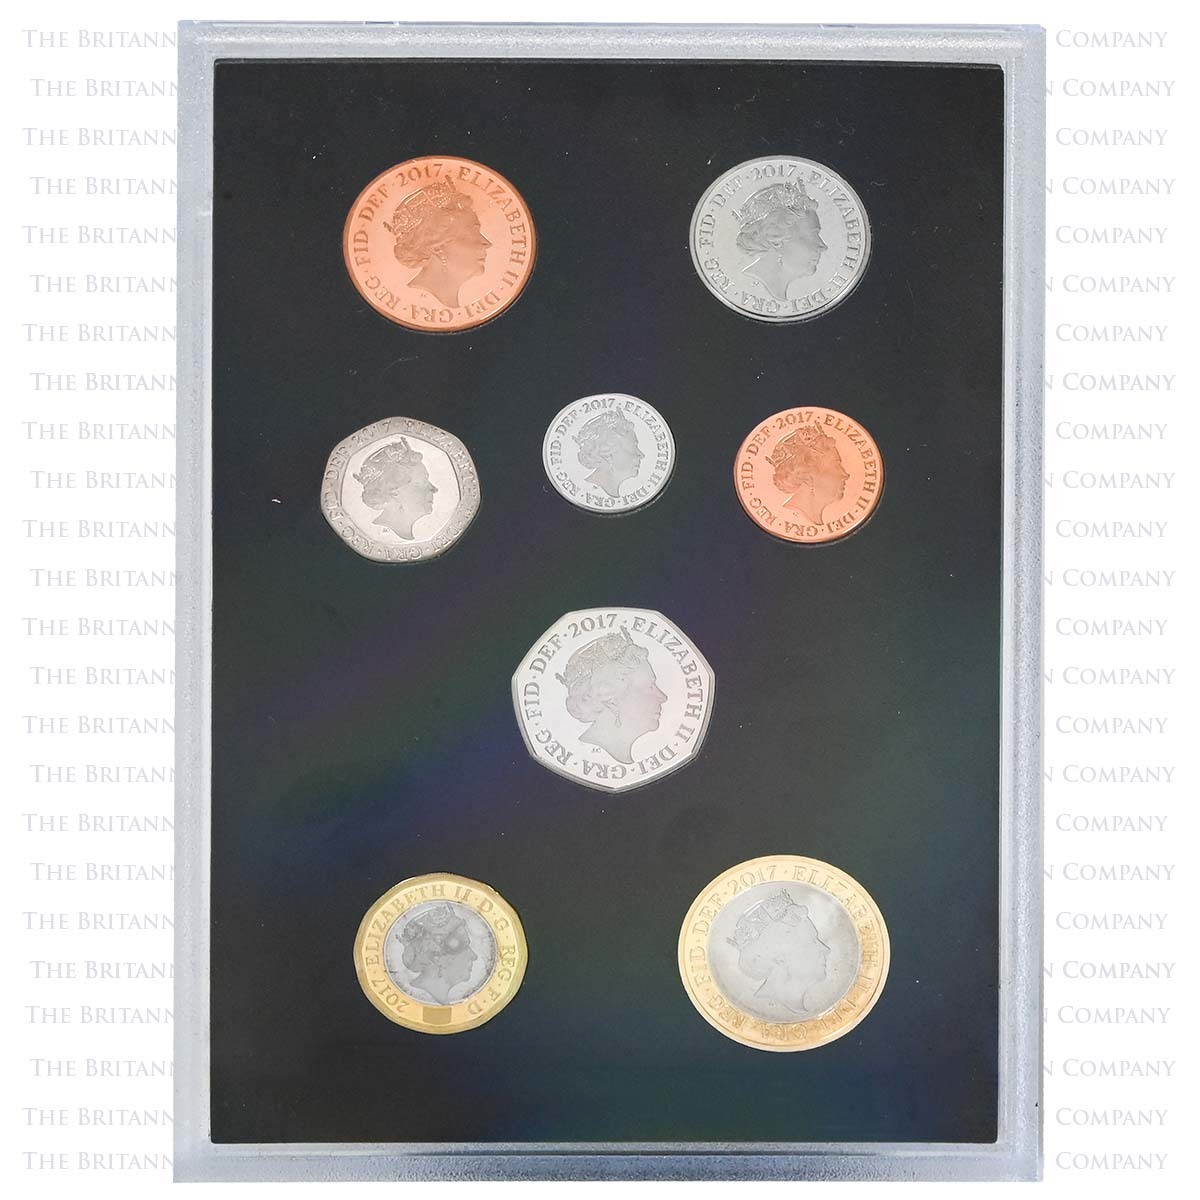 2017-proof-coin-set-collector-edtition-005-m